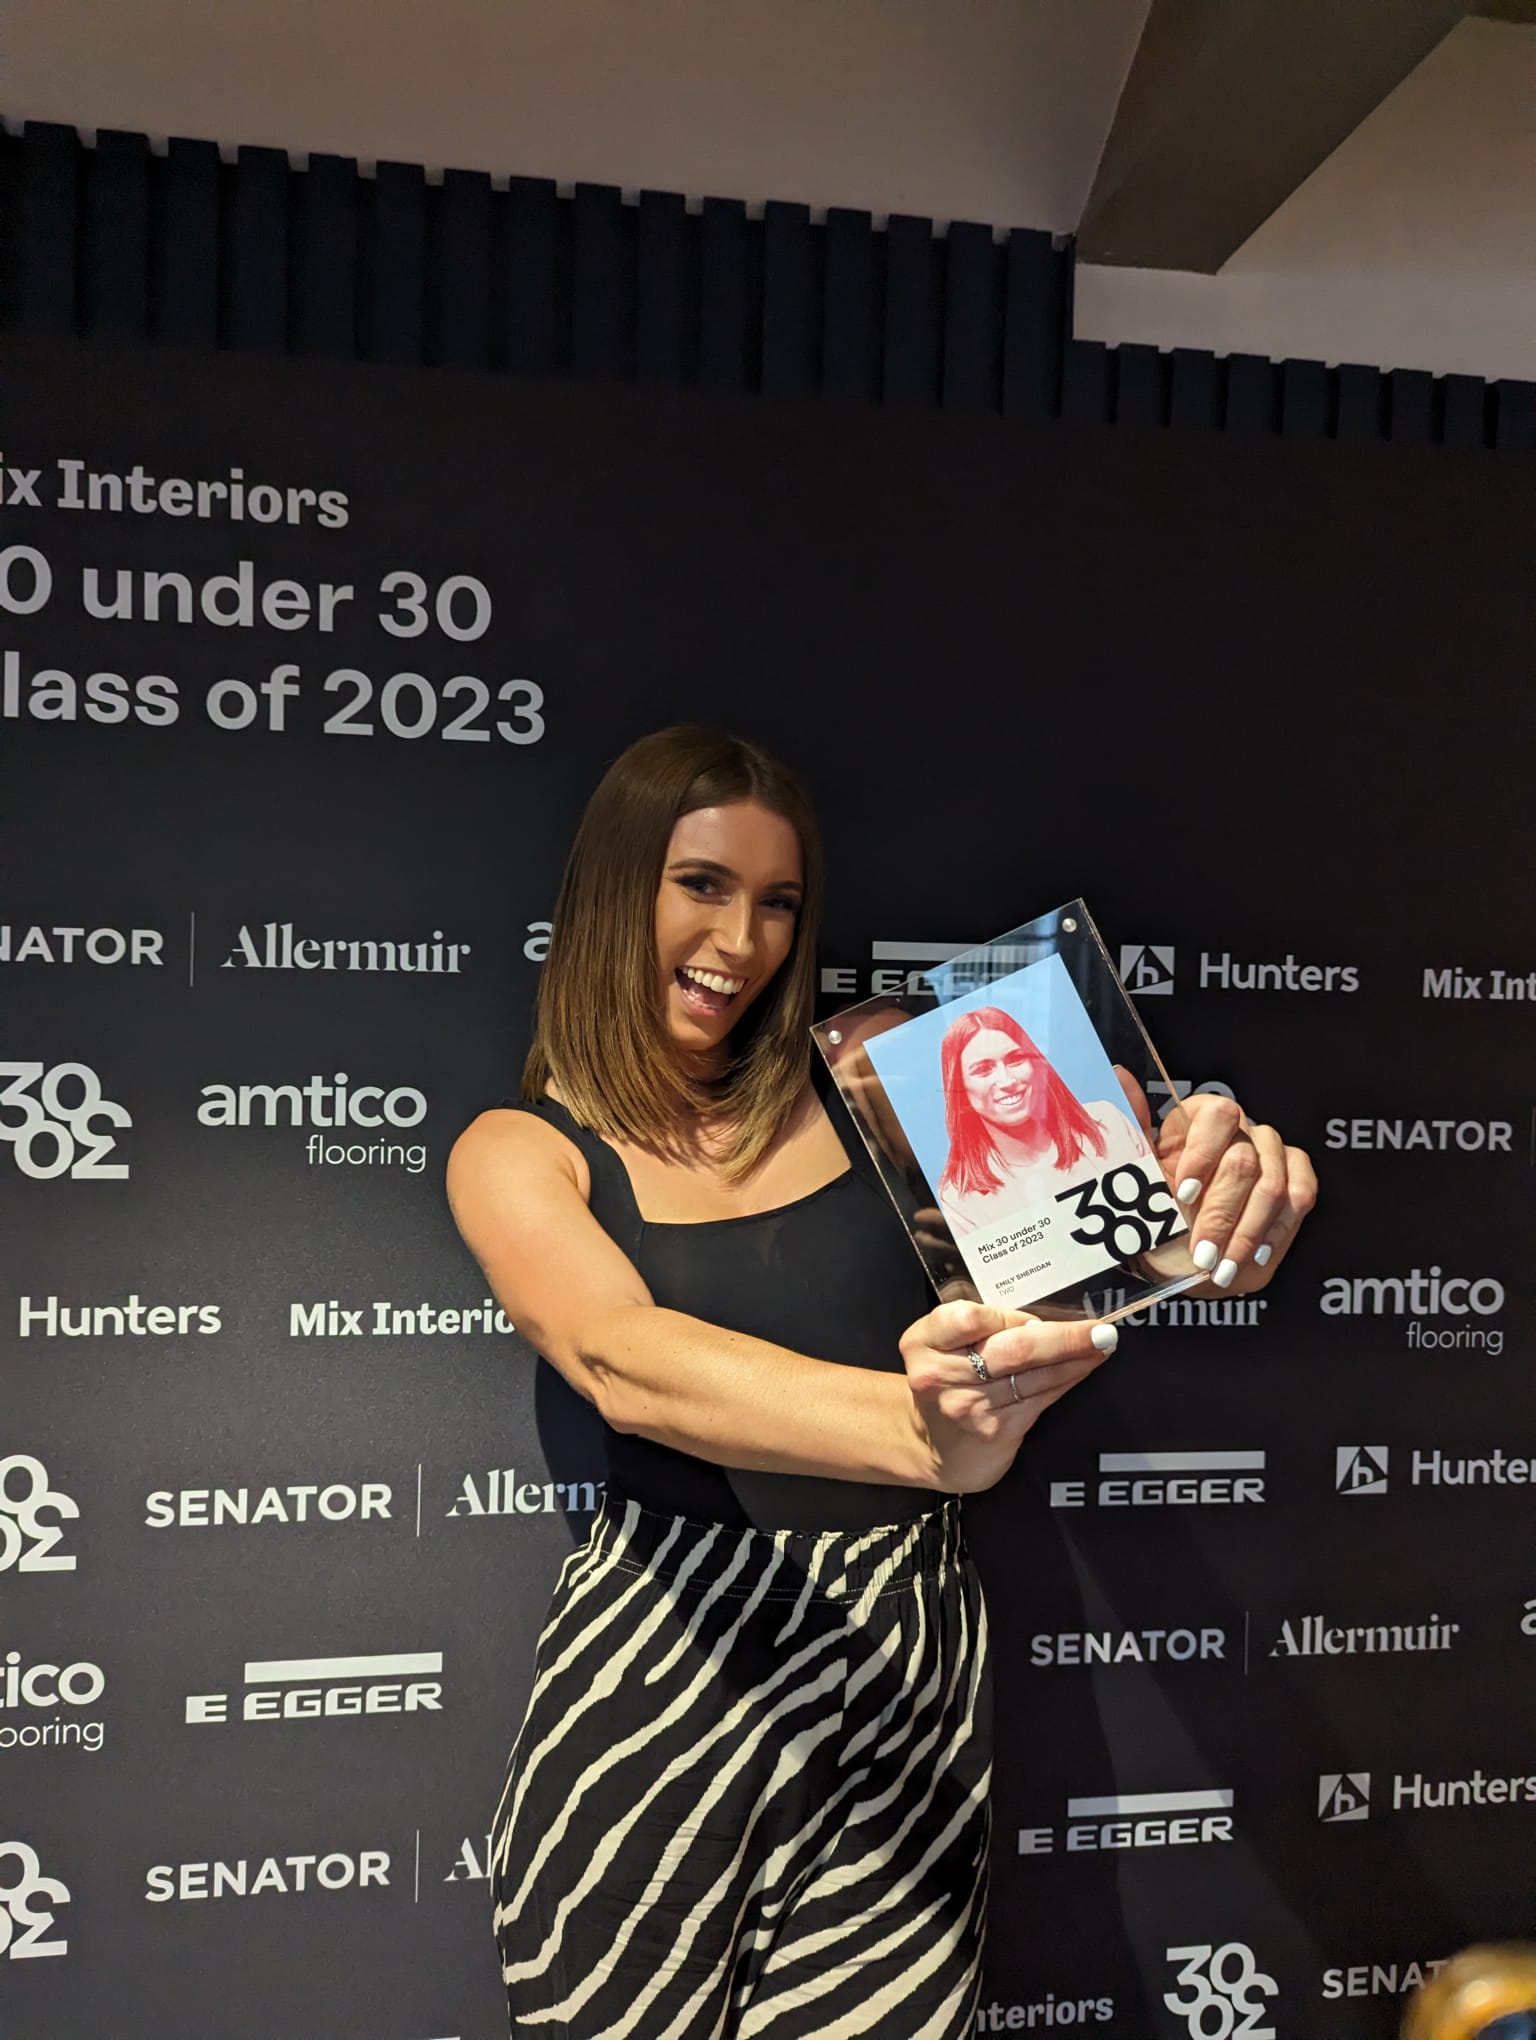 Emily Sheridan Named in Mix Interiors 30 Under 30